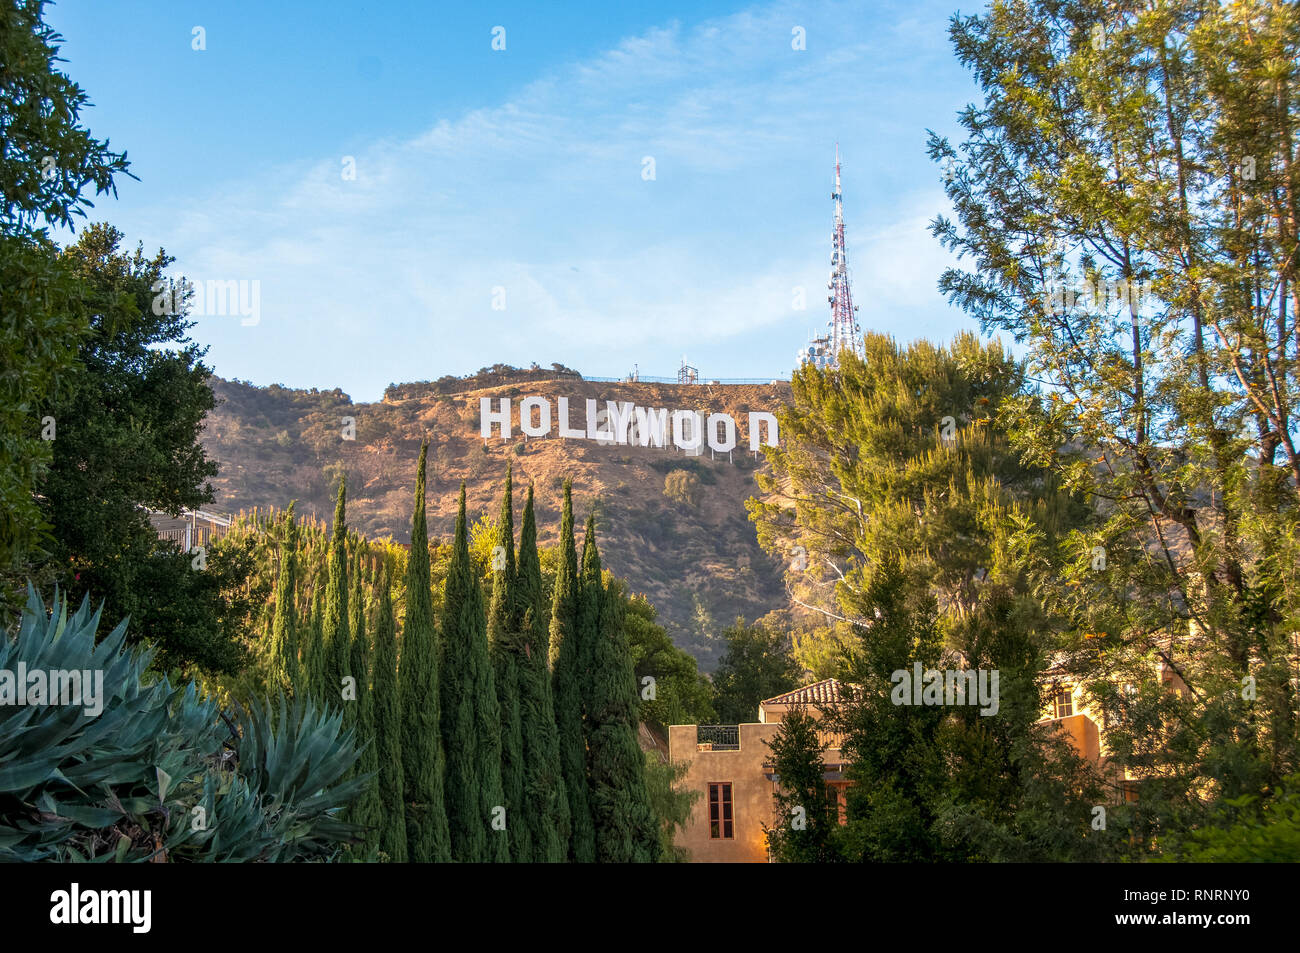 Famous landmark Hollywood Sign in Los Angeles, California. Stock Photo